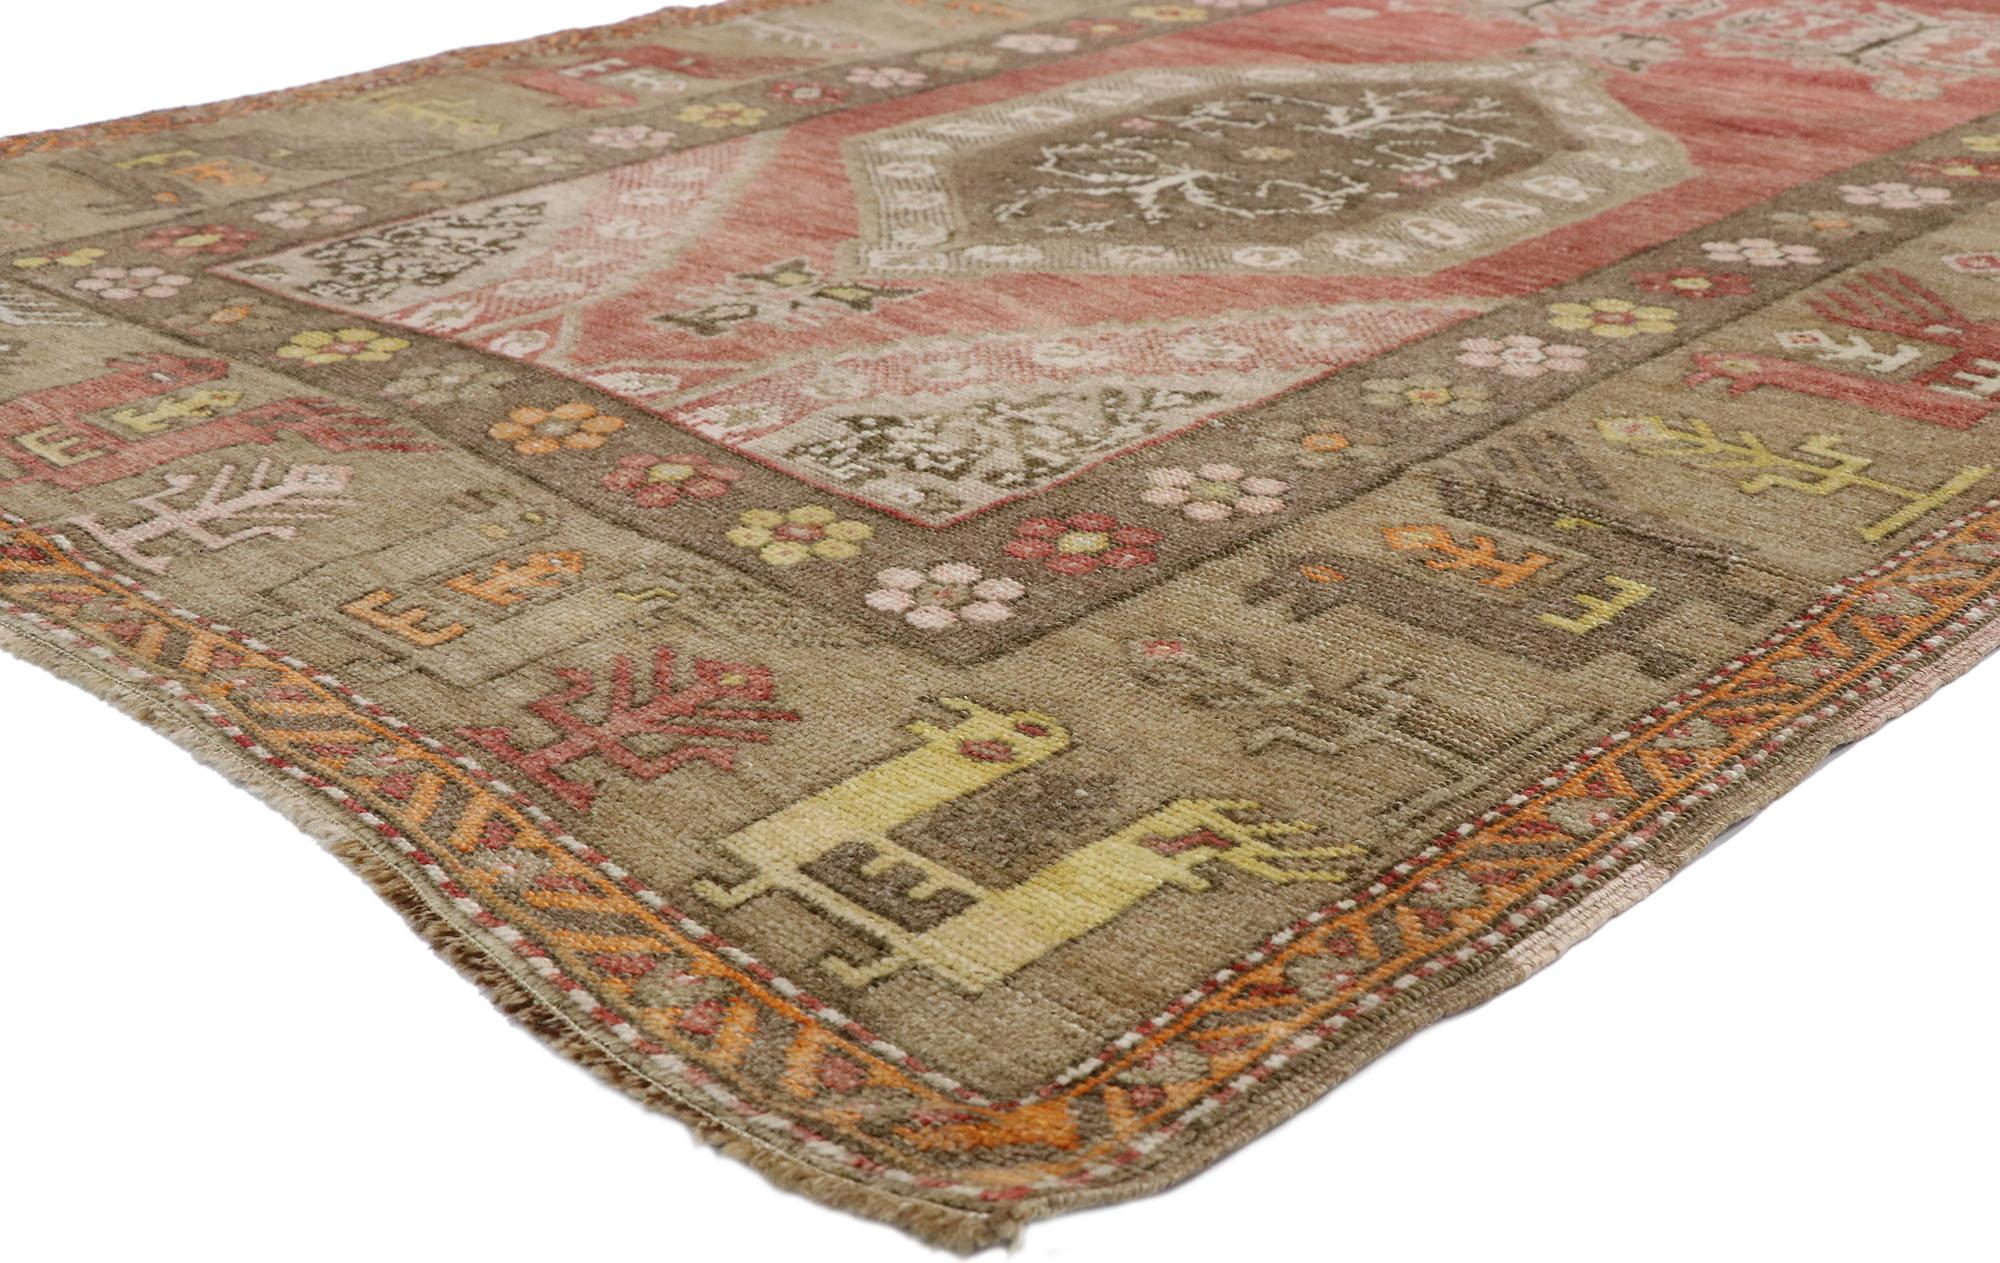 52760 vintage Turkish Oushak Gallery rug with Mid-Century Modern style. This hand knotted wool vintage Turkish Oushak gallery rug features three hexagonal medallions patterned with leafy tendrils floating in a sea of red abrash. The field is dotted